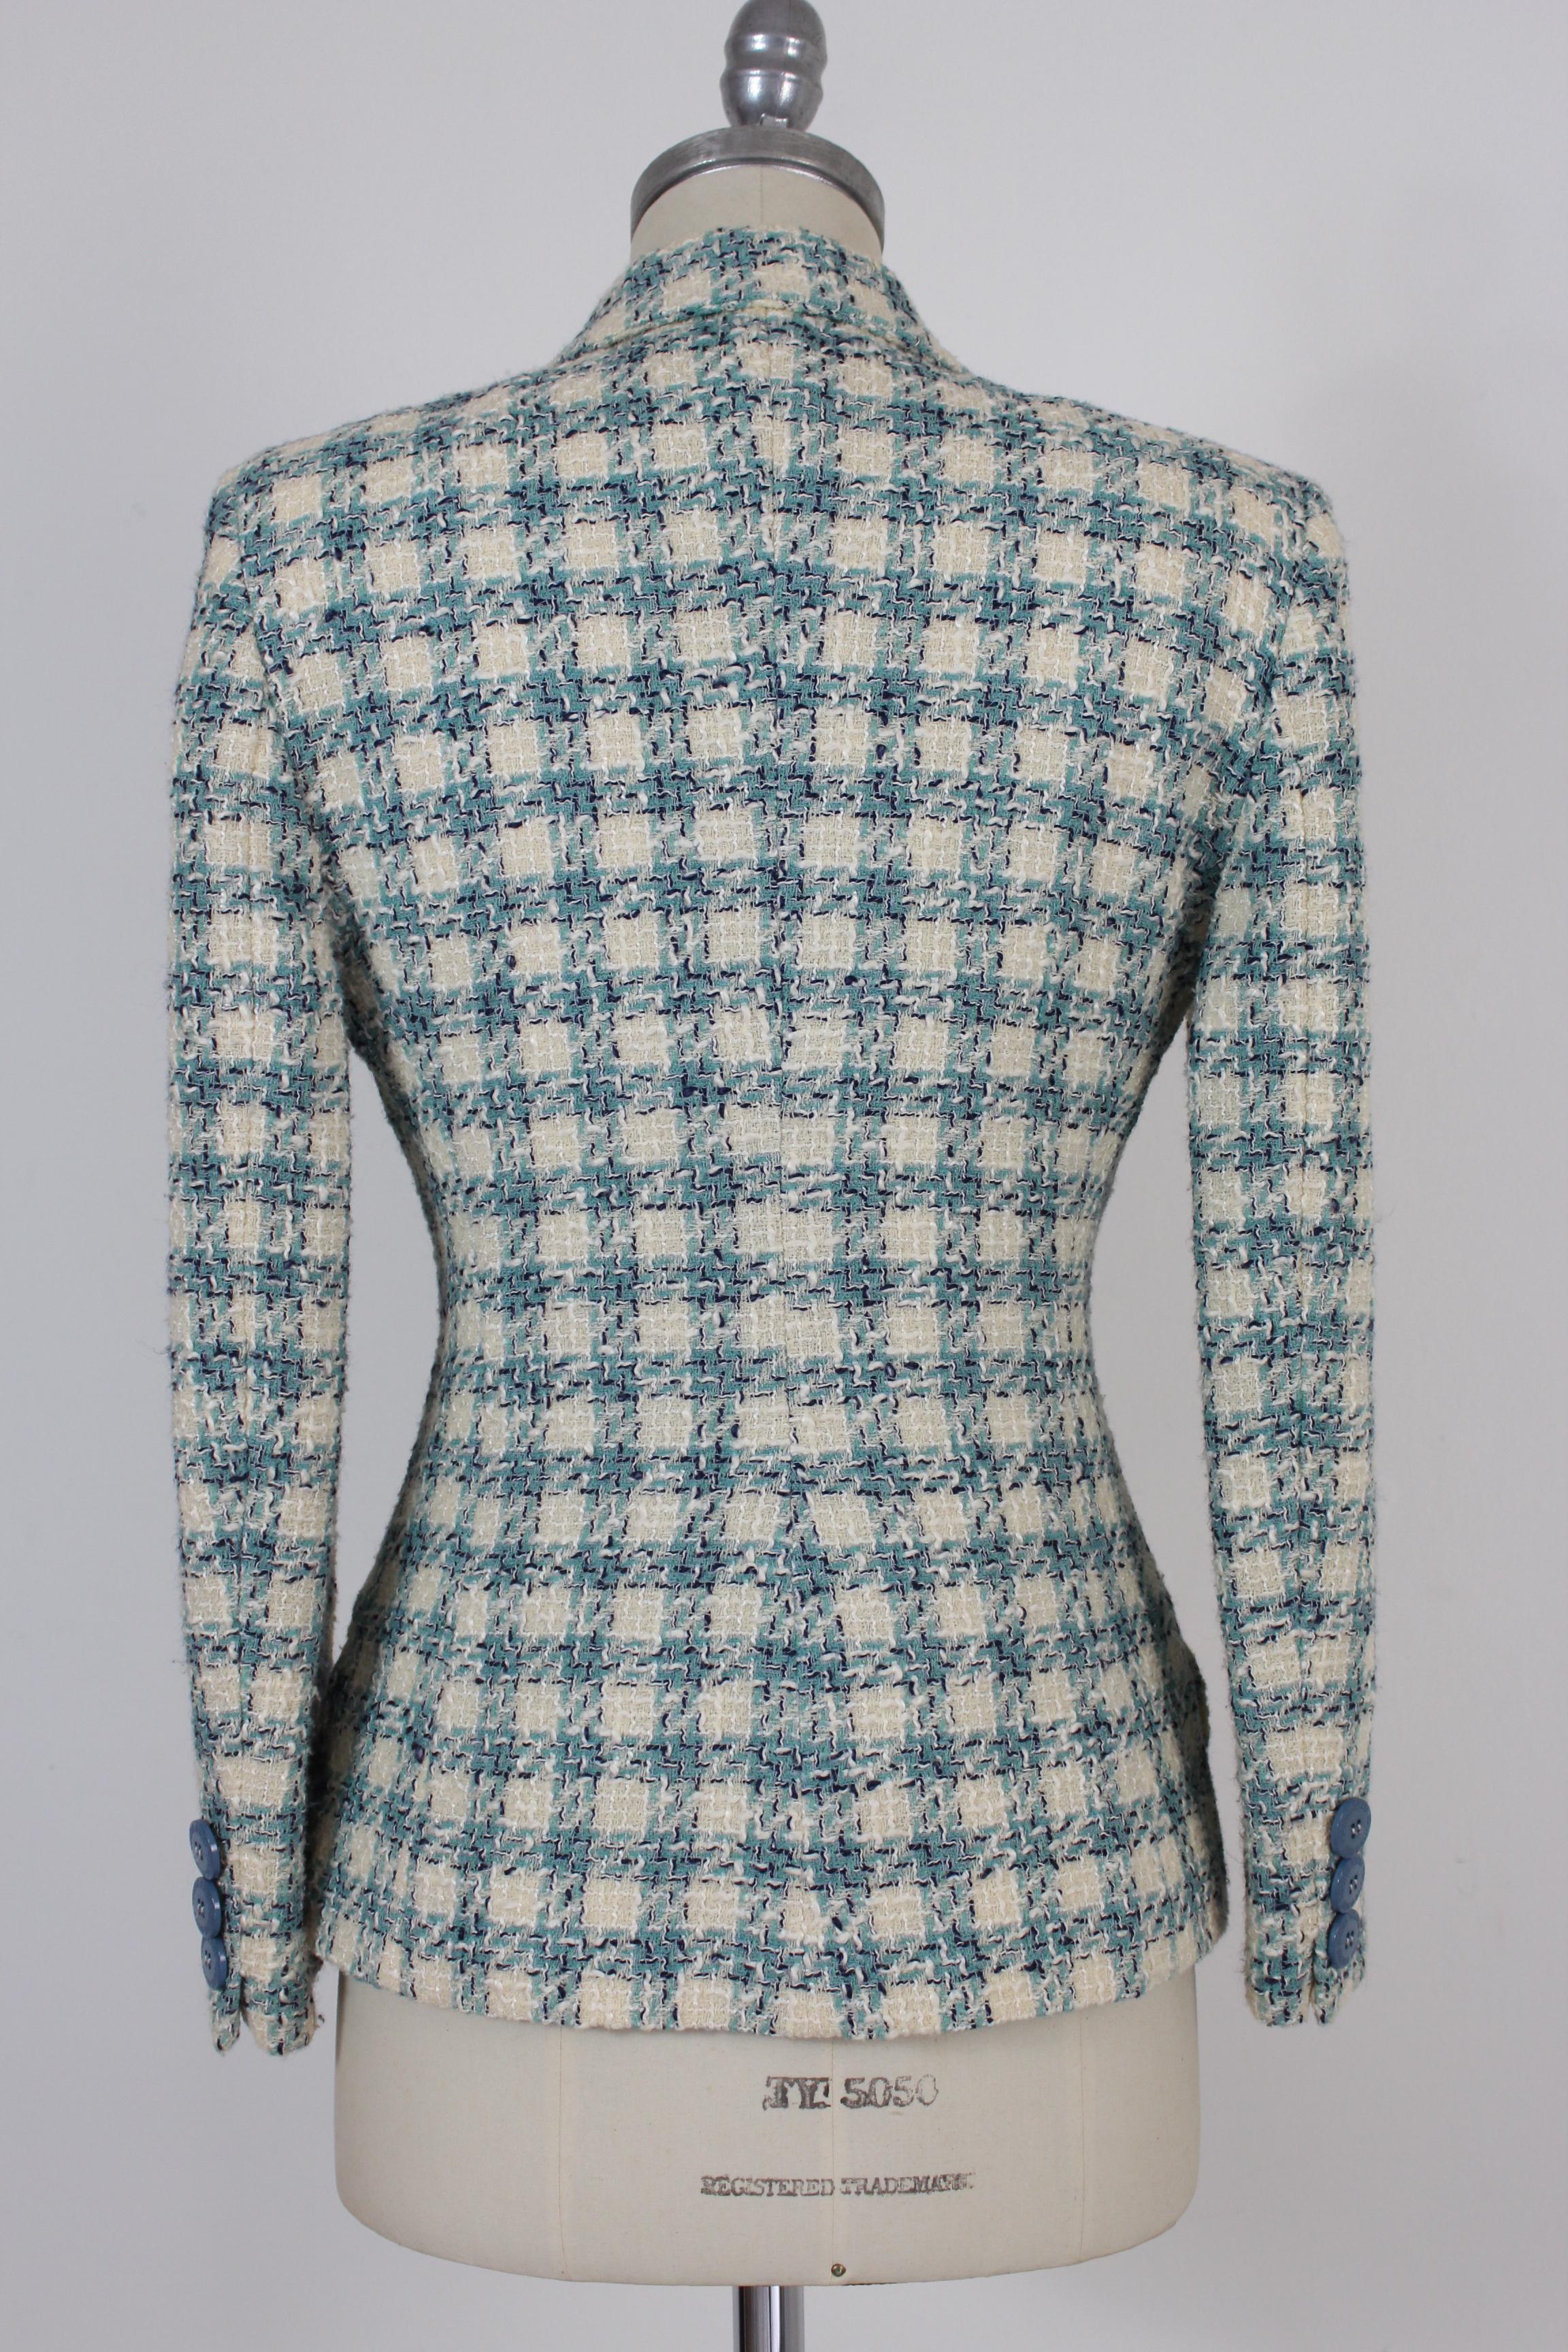 Enrico Coveri 90s vintage women's jacket. Elegant jacket, short at the waist. Blazer in blue and white boucle fabric. 33% cotton, 43% wool, 15% polyester. Made in Italy. Excellent vintage condition.

Size: 44 It 10 Us 12 Uk

Shoulder: 44 cm
Bust /